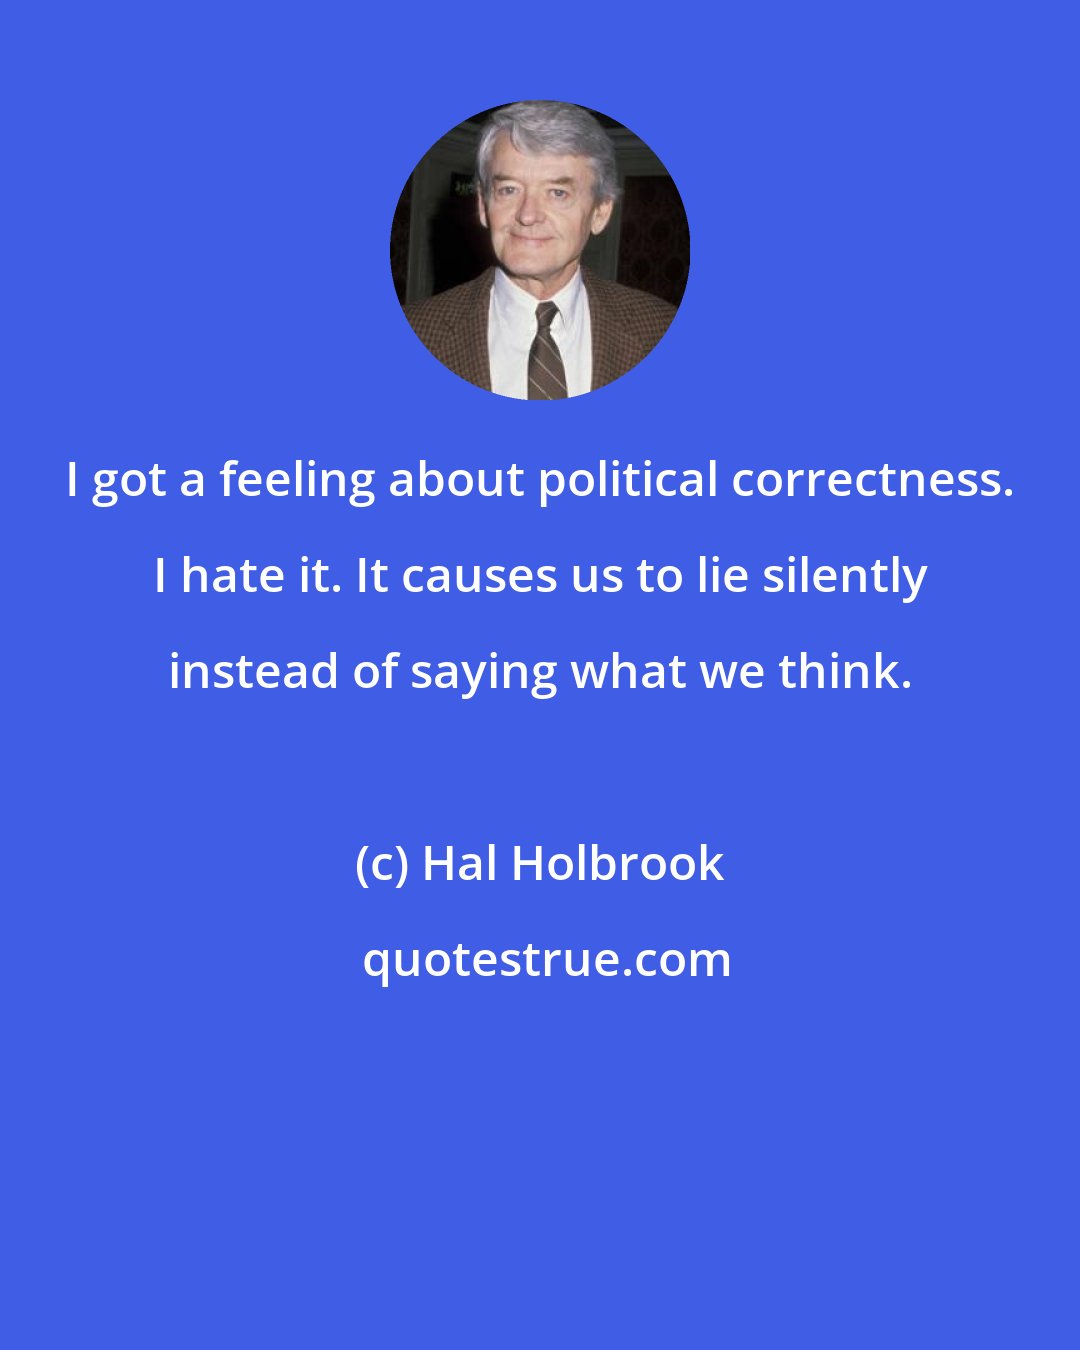 Hal Holbrook: I got a feeling about political correctness. I hate it. It causes us to lie silently instead of saying what we think.